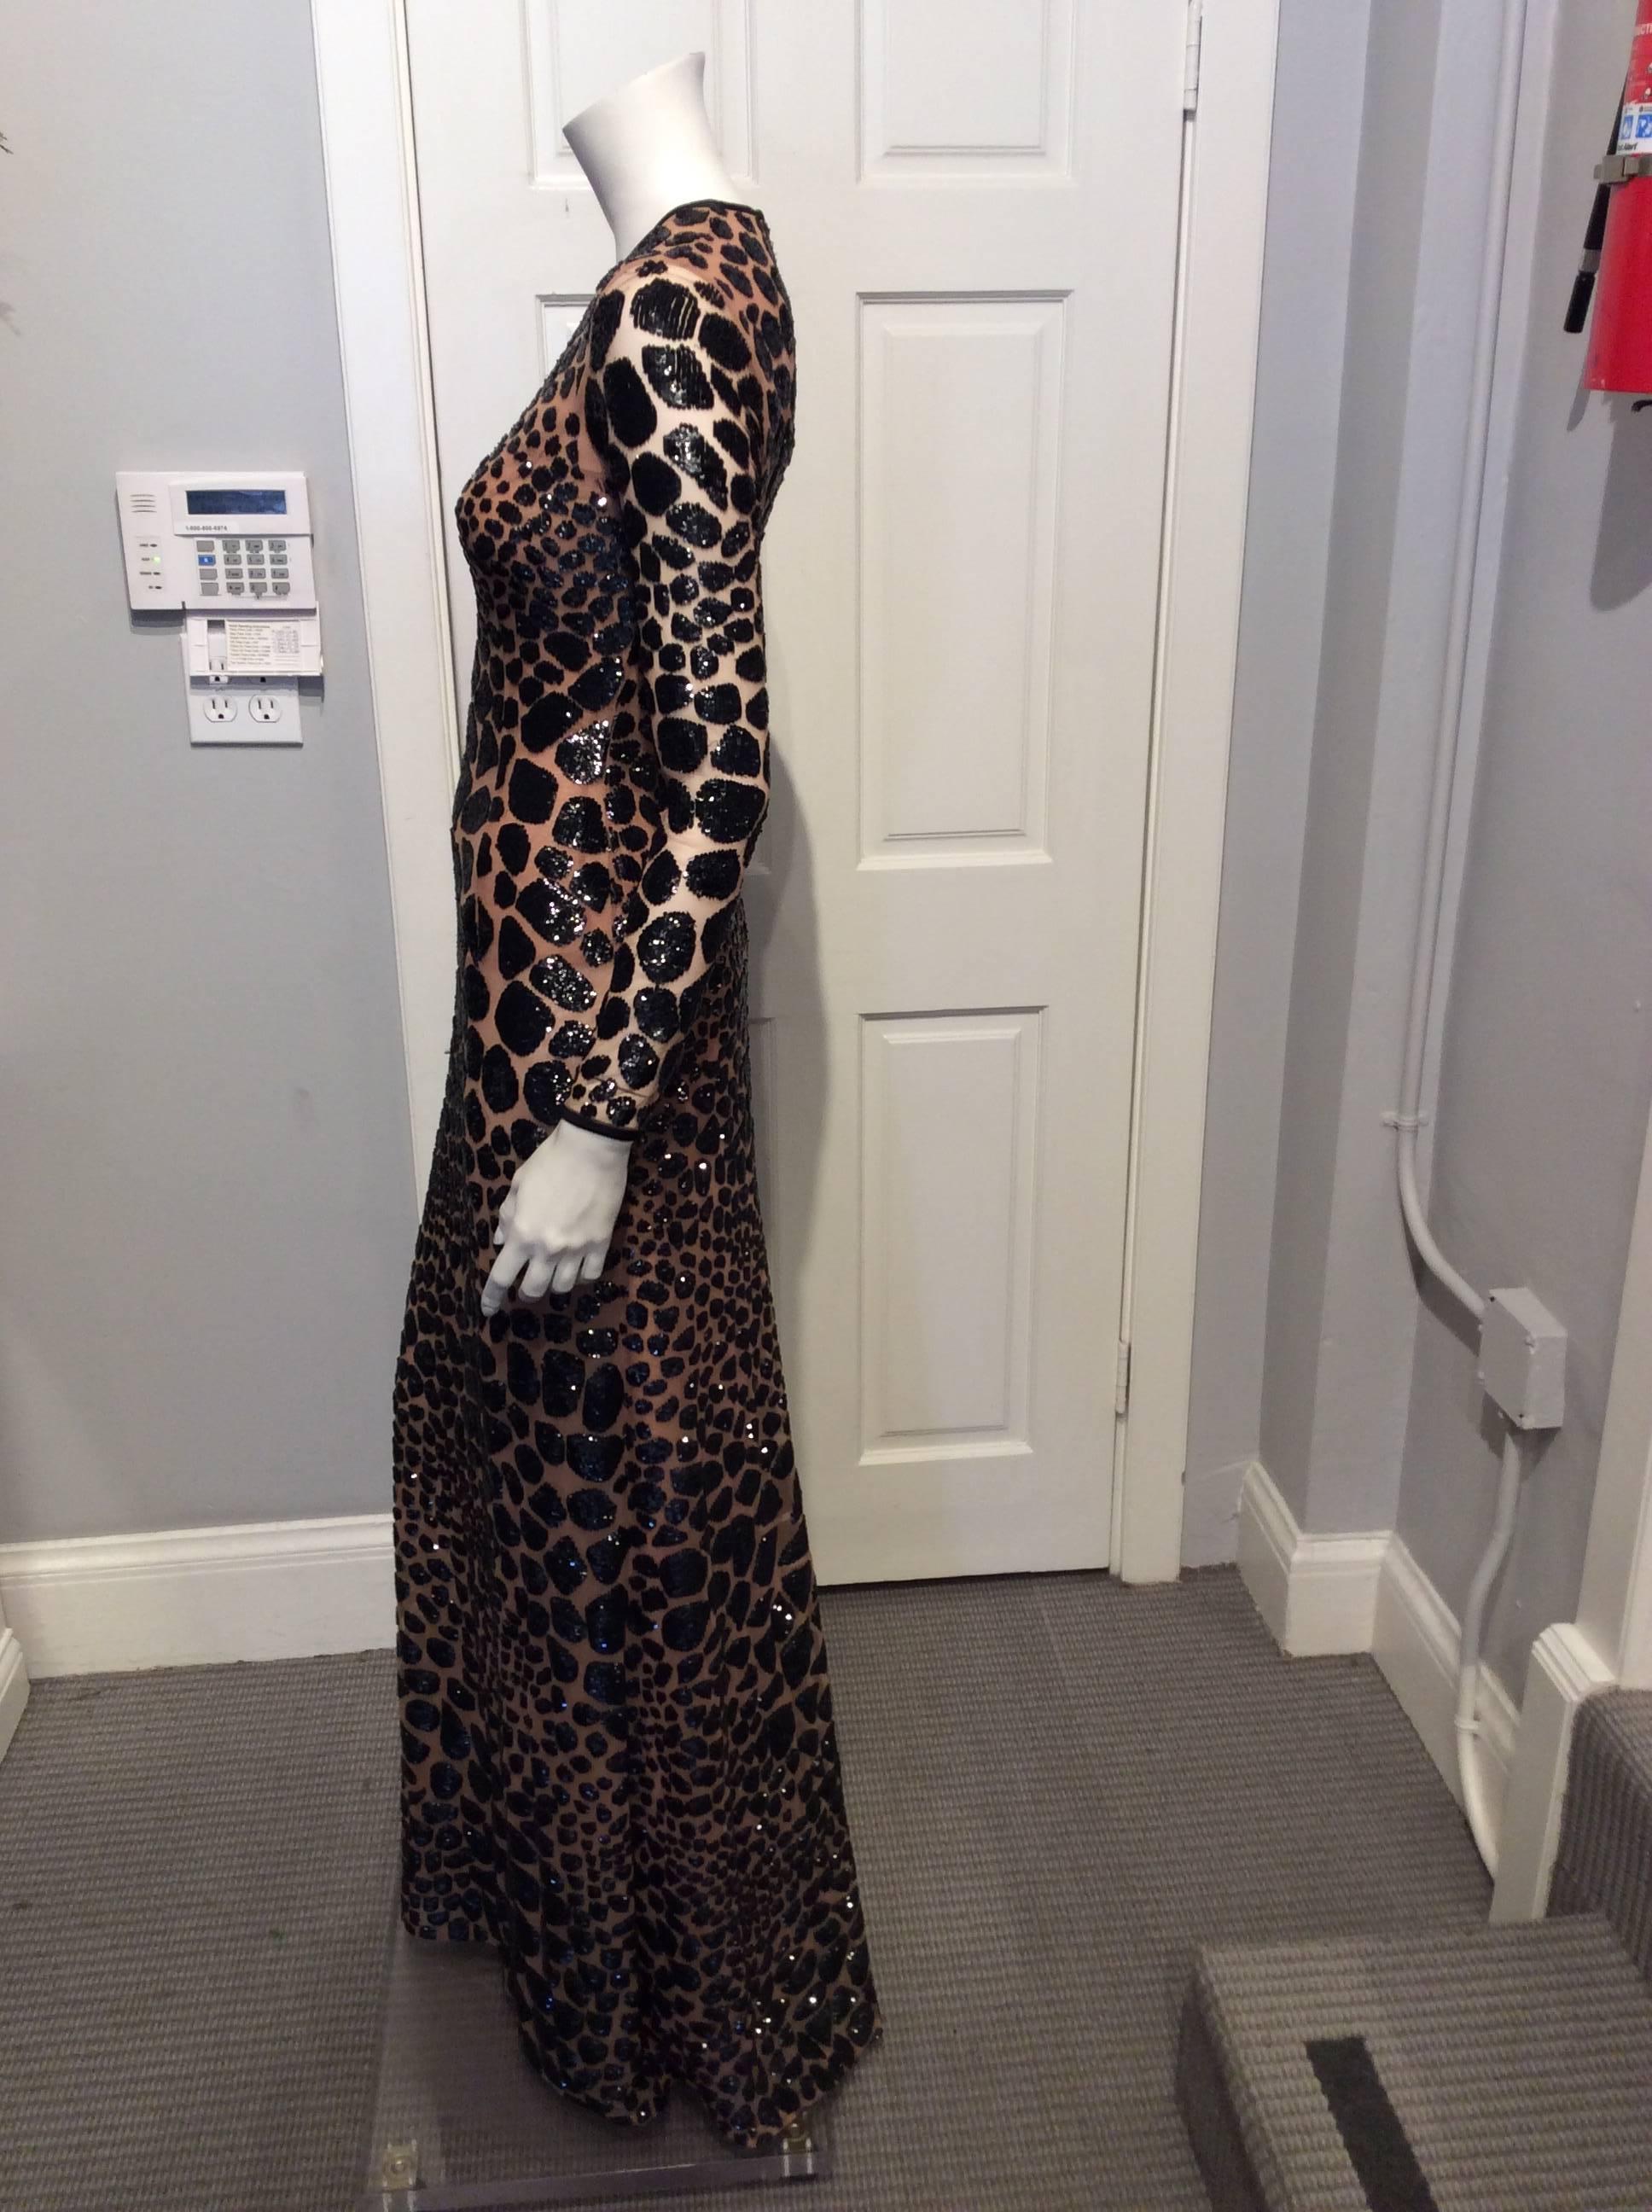 Michael Kors long sleeve body con gown with leopard spots embroidery in black sequins. The dress comes with a built in mesh bodysuit.